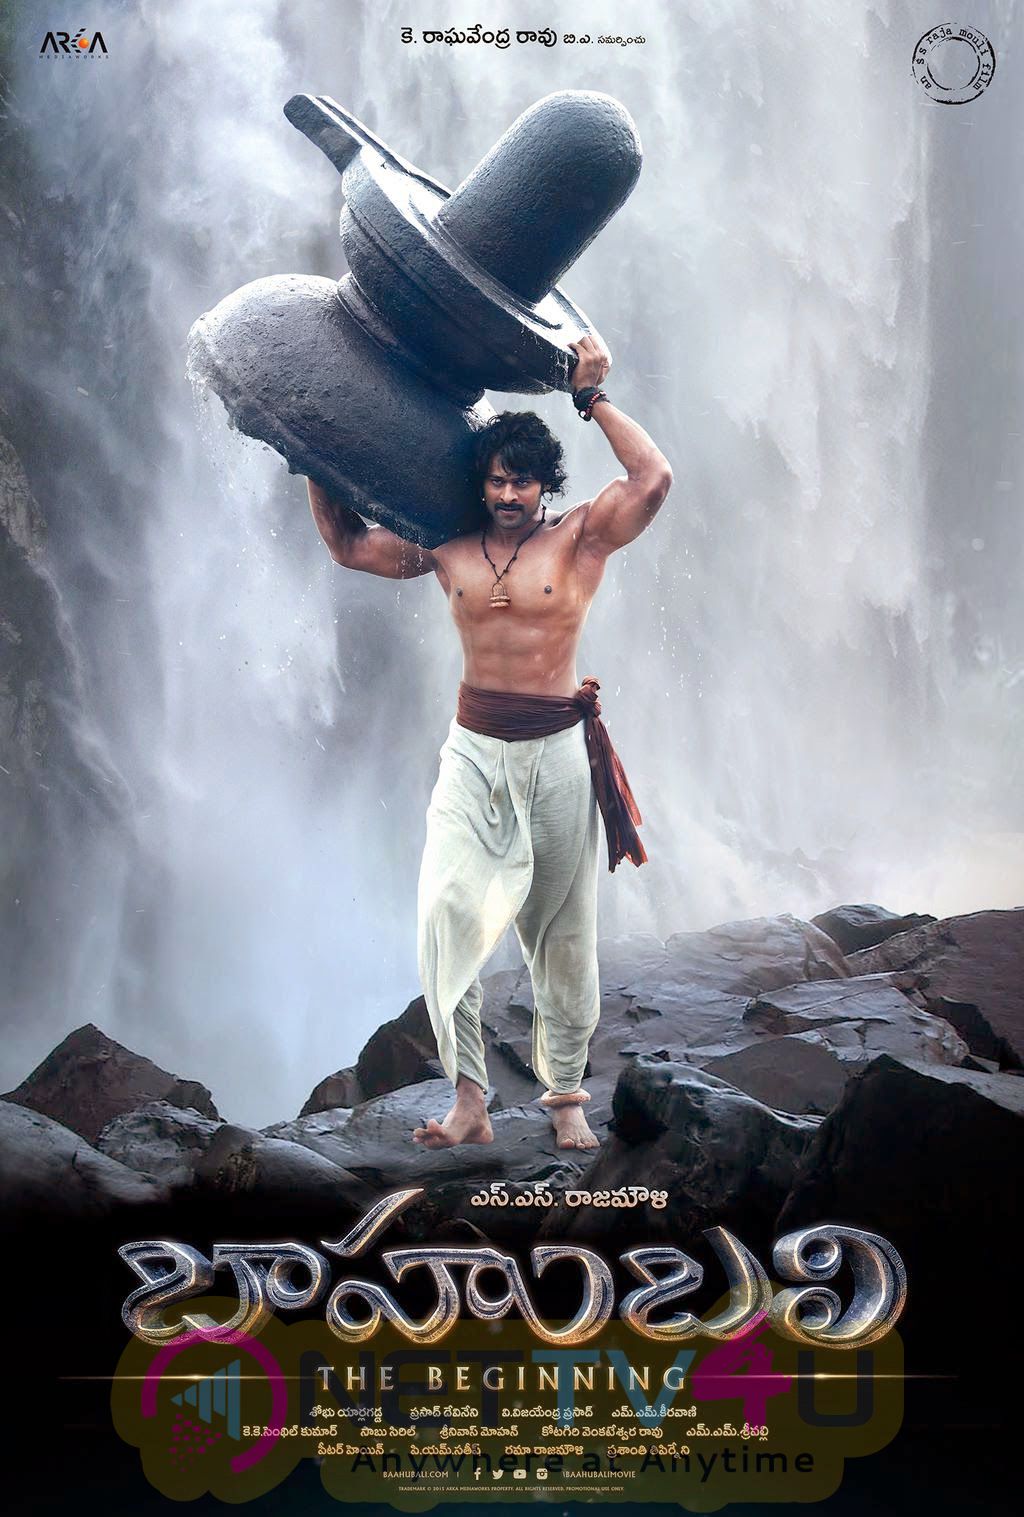 wallpapers and posters for baahubali telugu movie 30 days 9